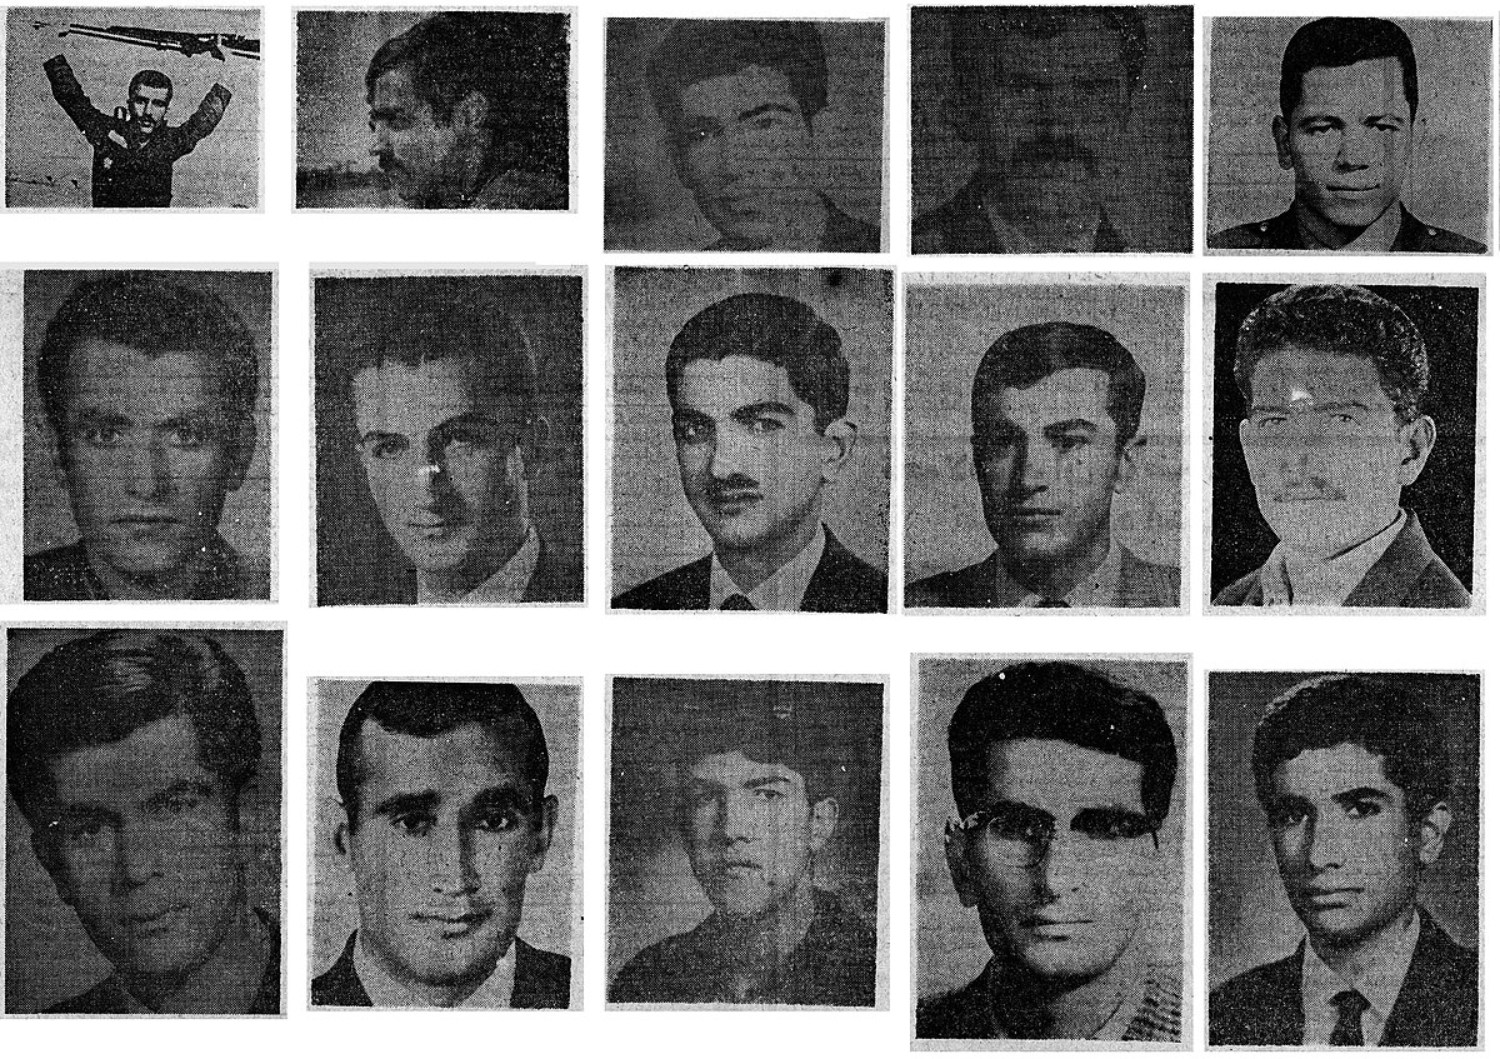 Mugshots of the young men accused of involvement with the Siahkal incident were widely published in Iranian newspapers (Wikicommons)